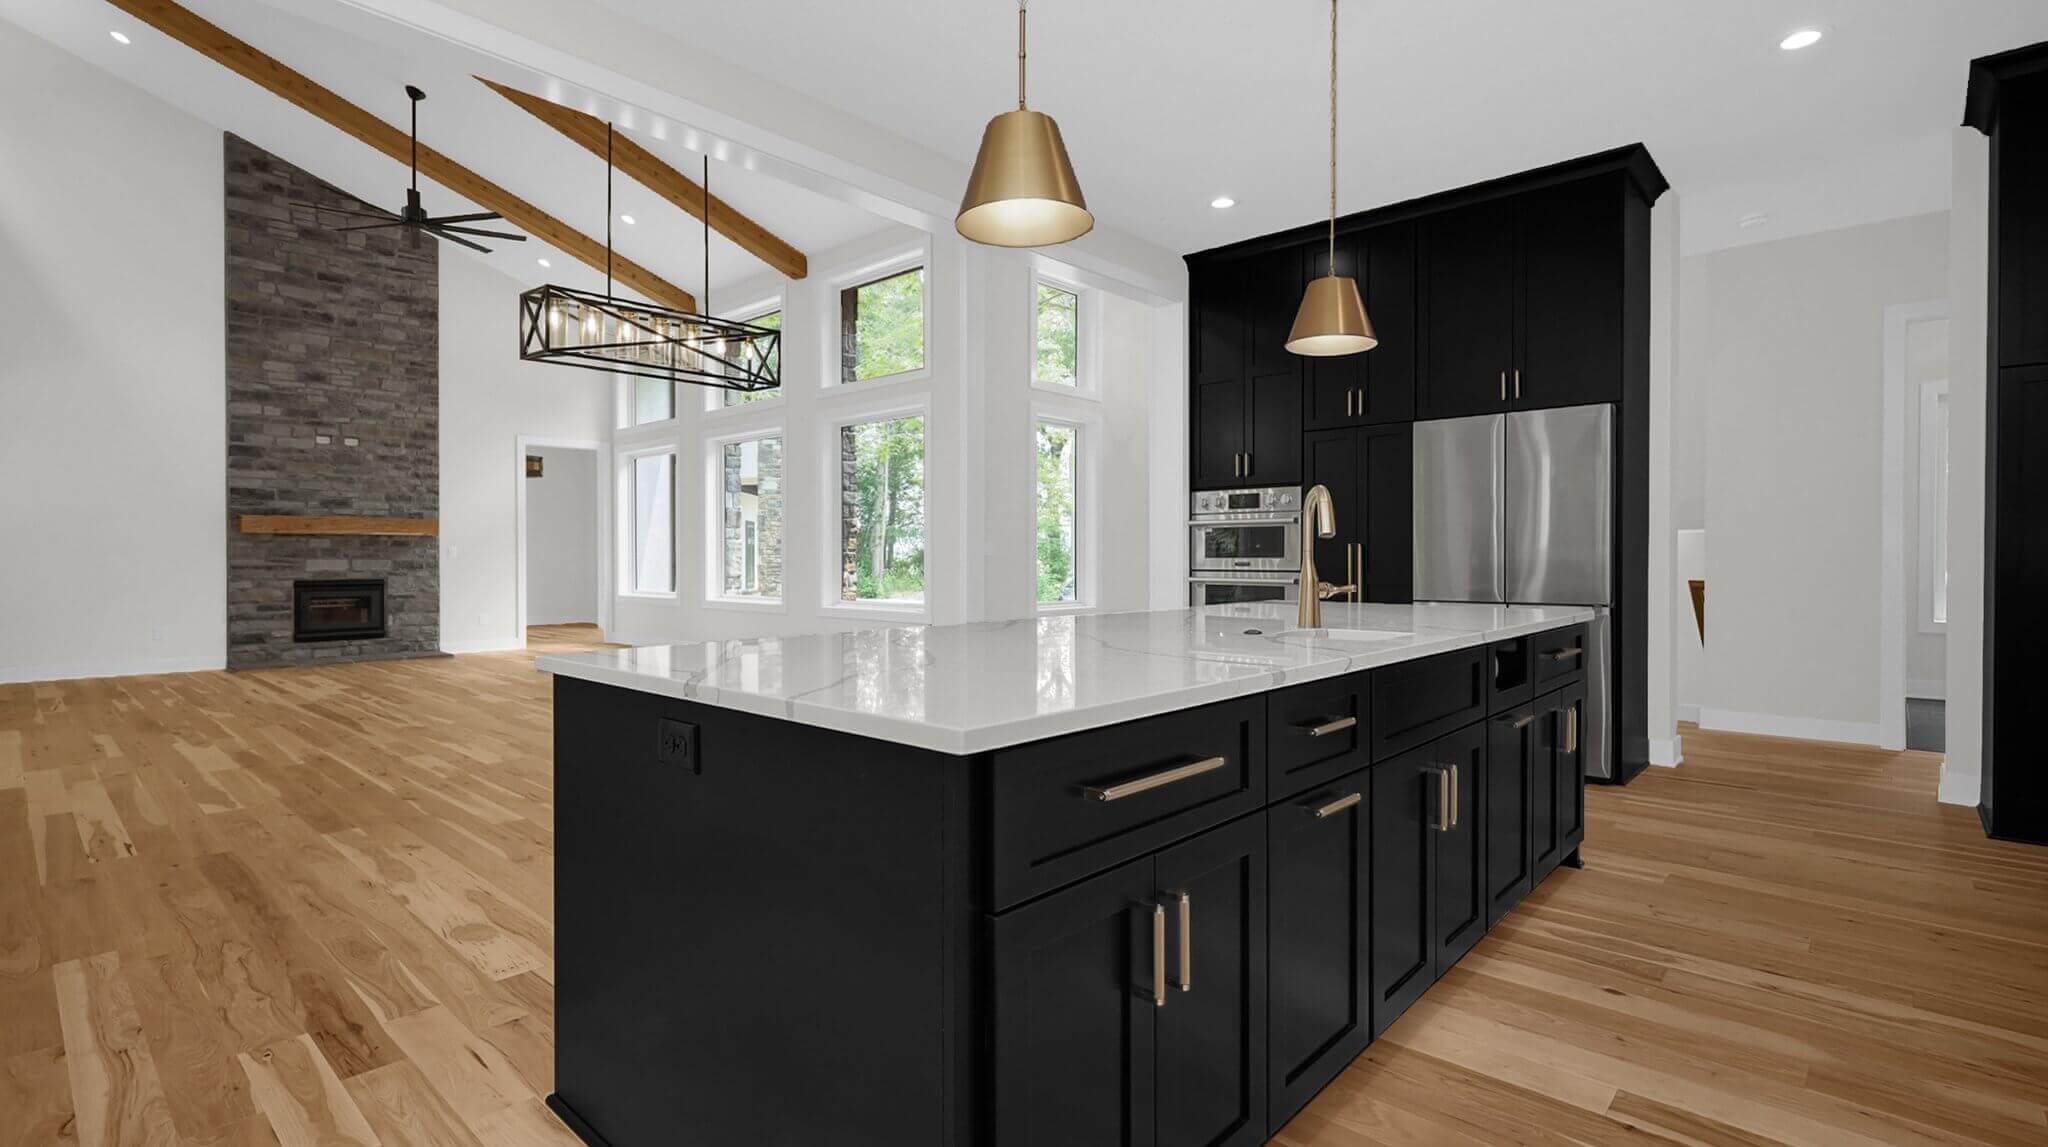 Driven by Passion - Powered by Dreams- Let Coppertree Homes build your next custom home! Give us a call at 614-425-2649 or visit us at https://coppertreehomes.com/